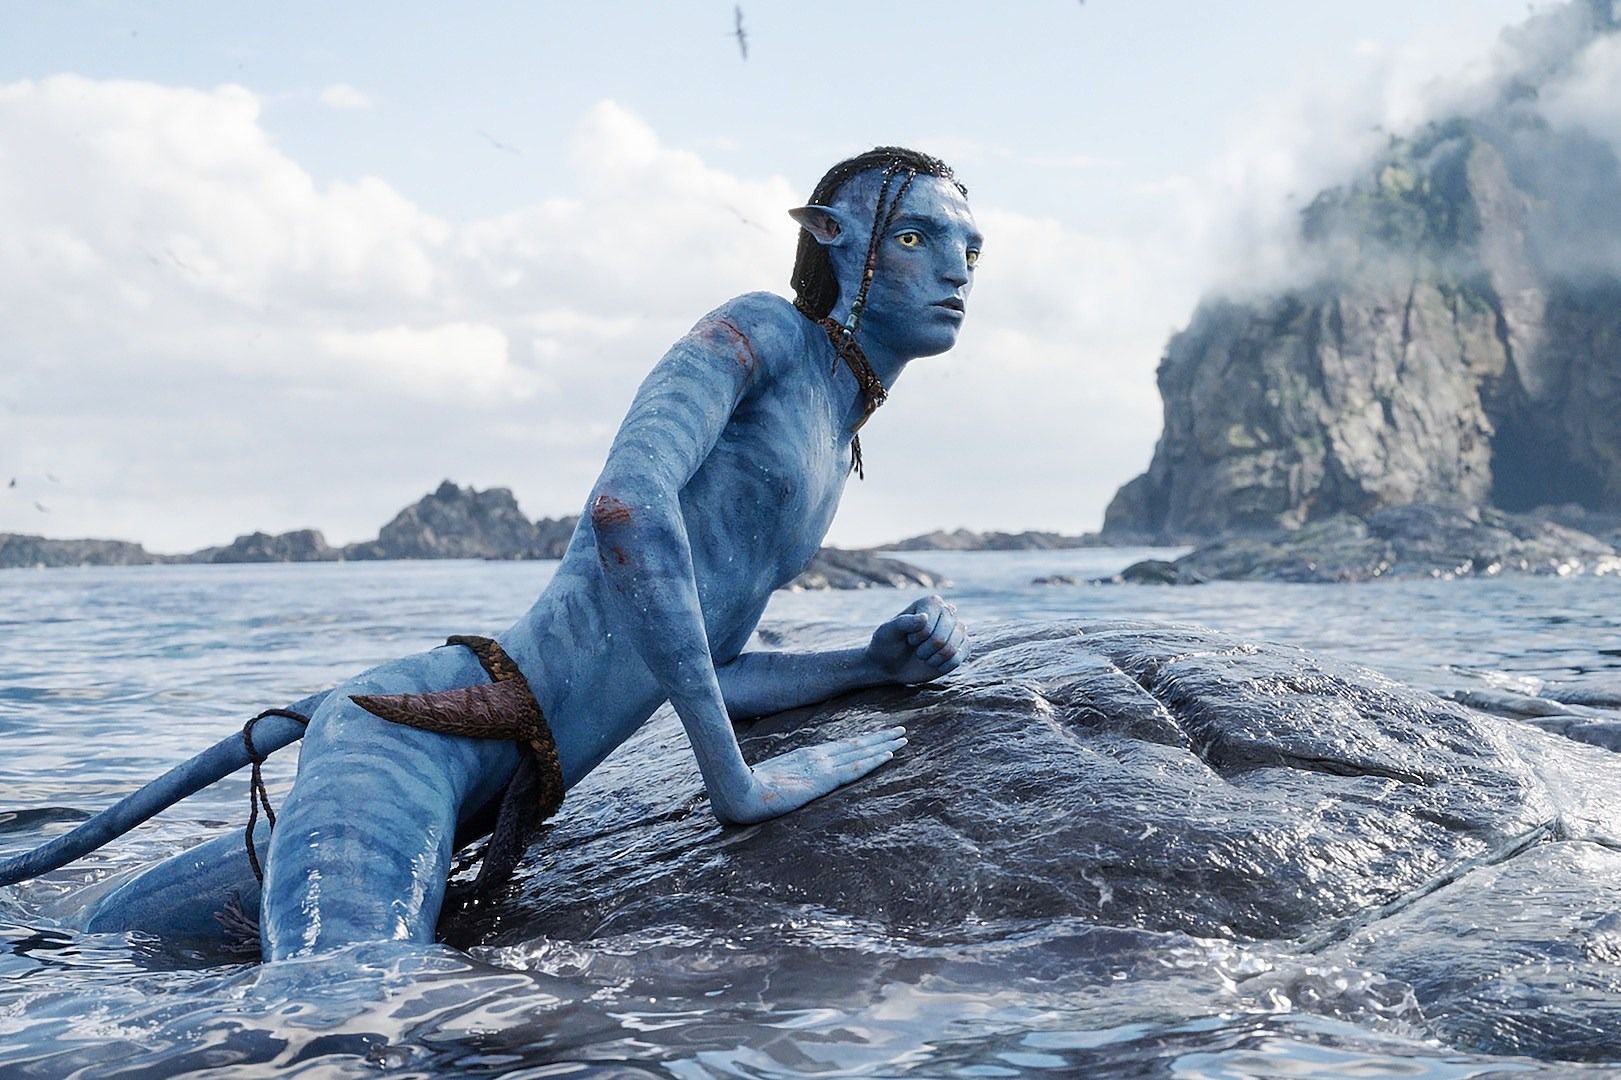 Wallpaper Avatar blue skin James Camerons movie 1920x1440 HD Picture  Image